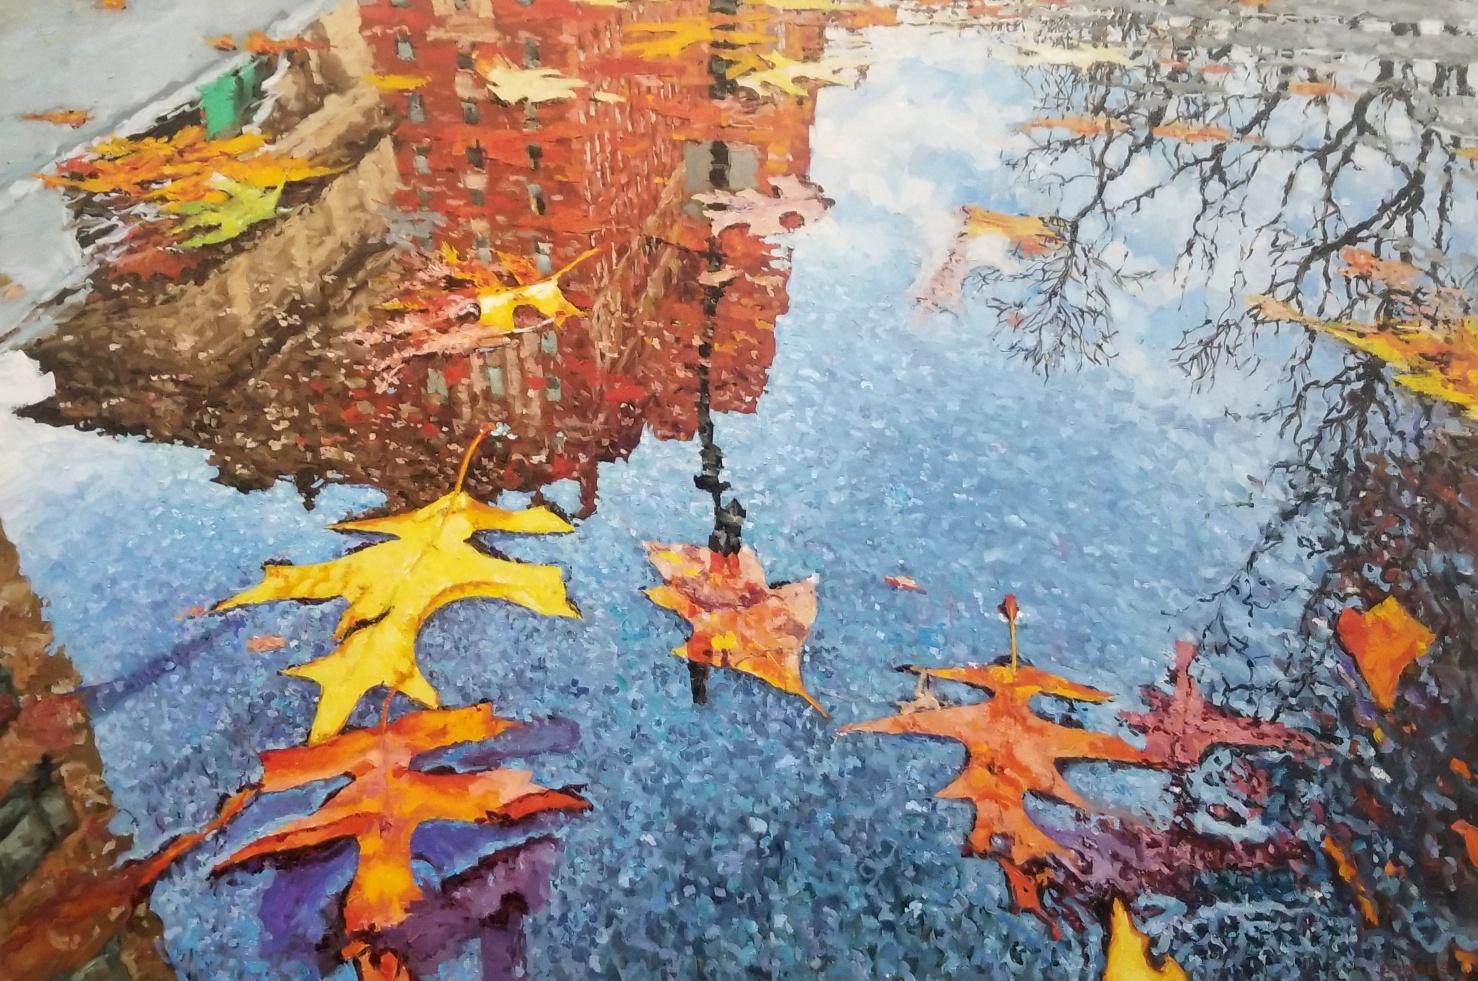 Richard Combes Landscape Painting - FALL REFLECTION CENTRAL PARK - Realism / Cityscape / Autumn 